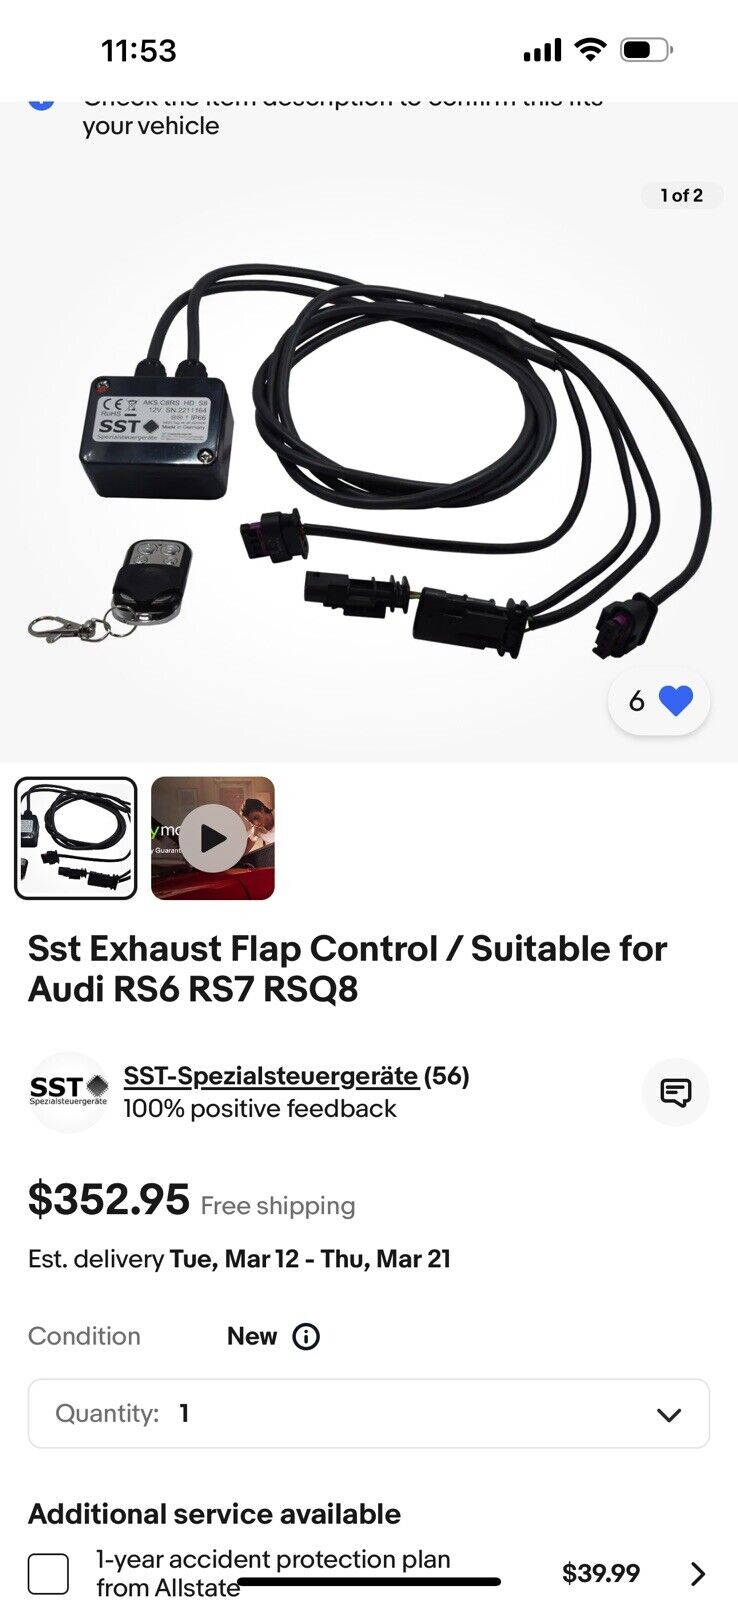 Sst Exhaust Flap Control / Suitable for Audi RS6 RS7 RSQ8